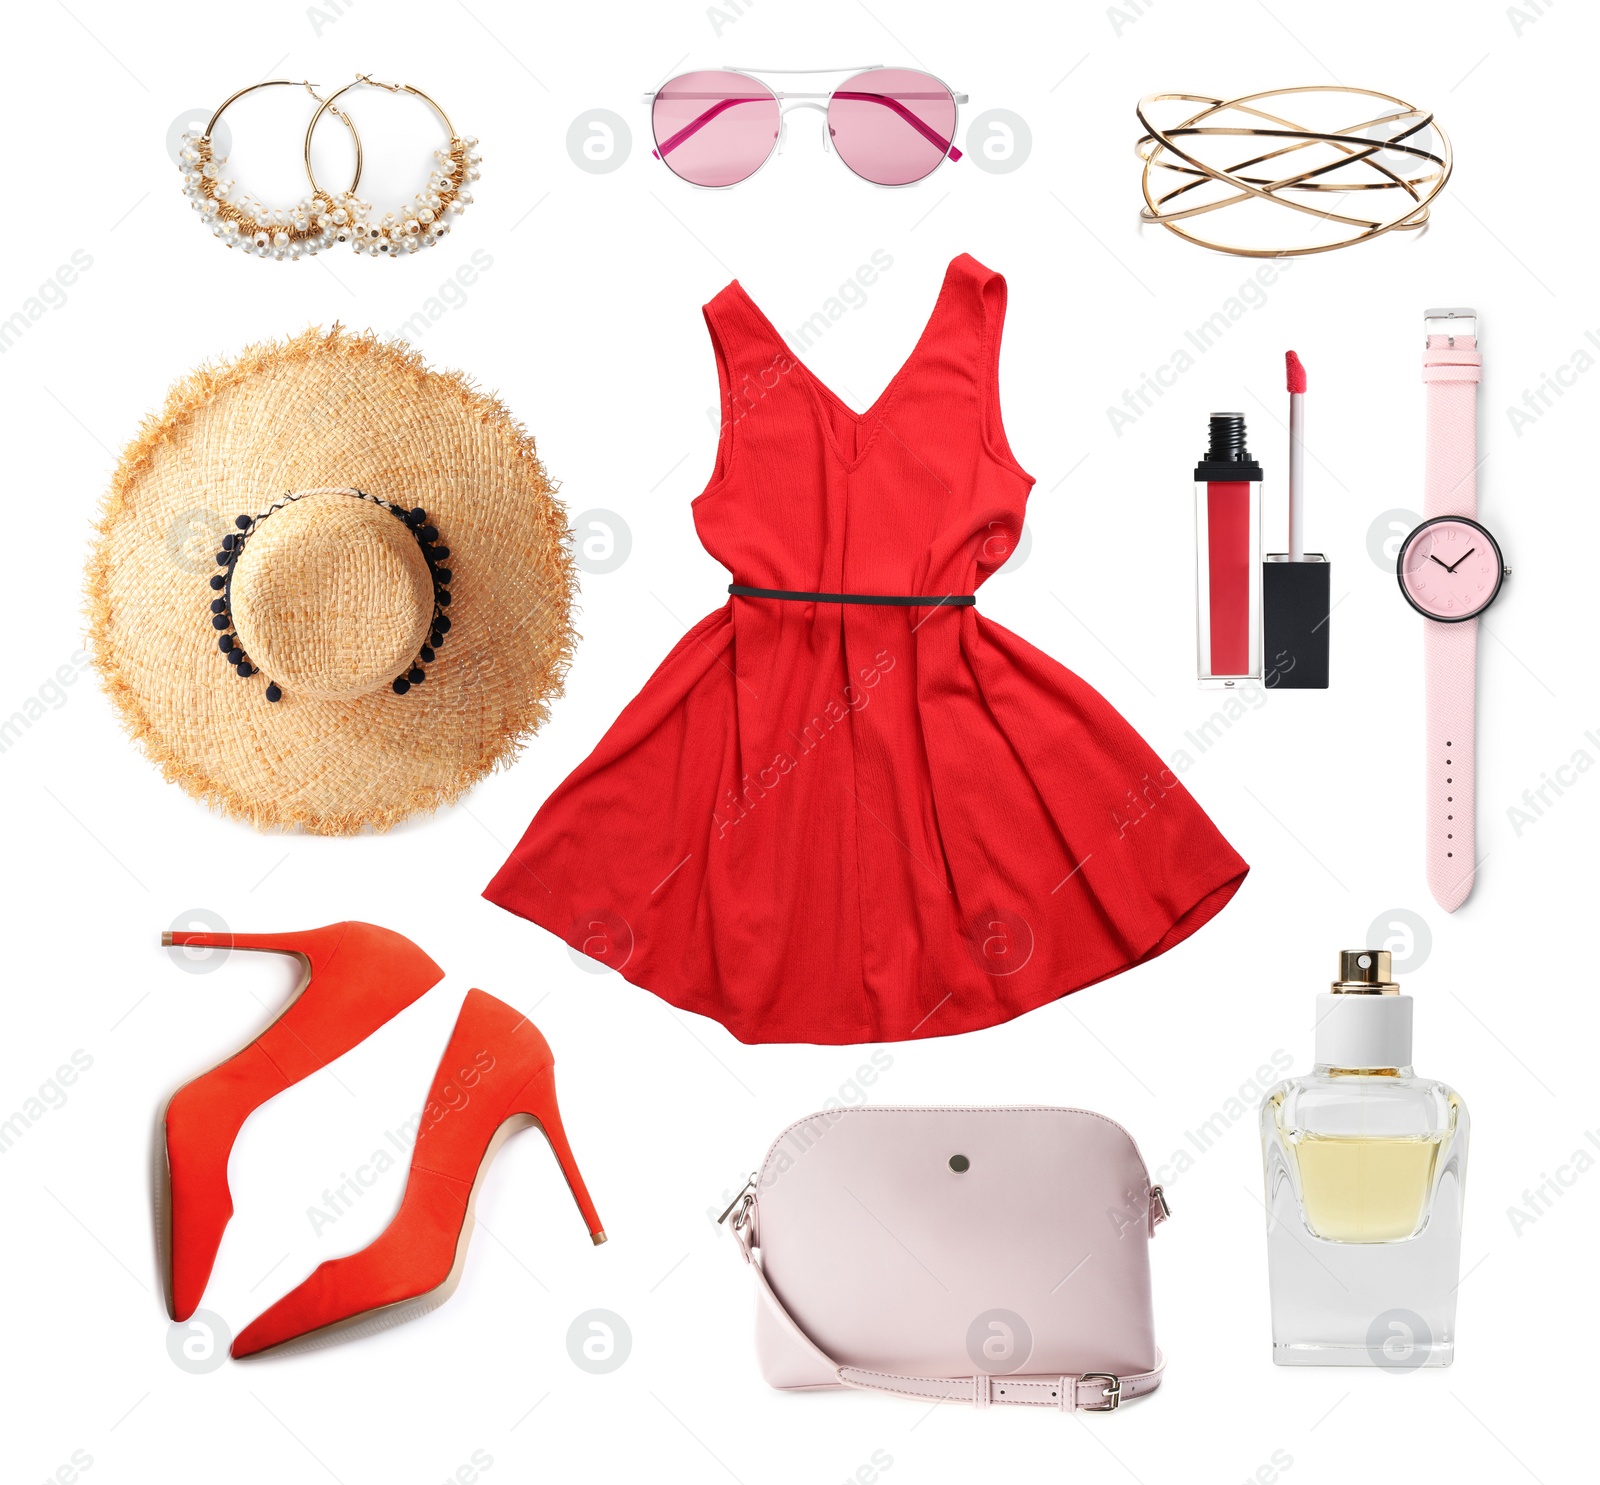 Image of Stylish look. Collage with dress, shoes, accessories and cosmetics for woman on white background